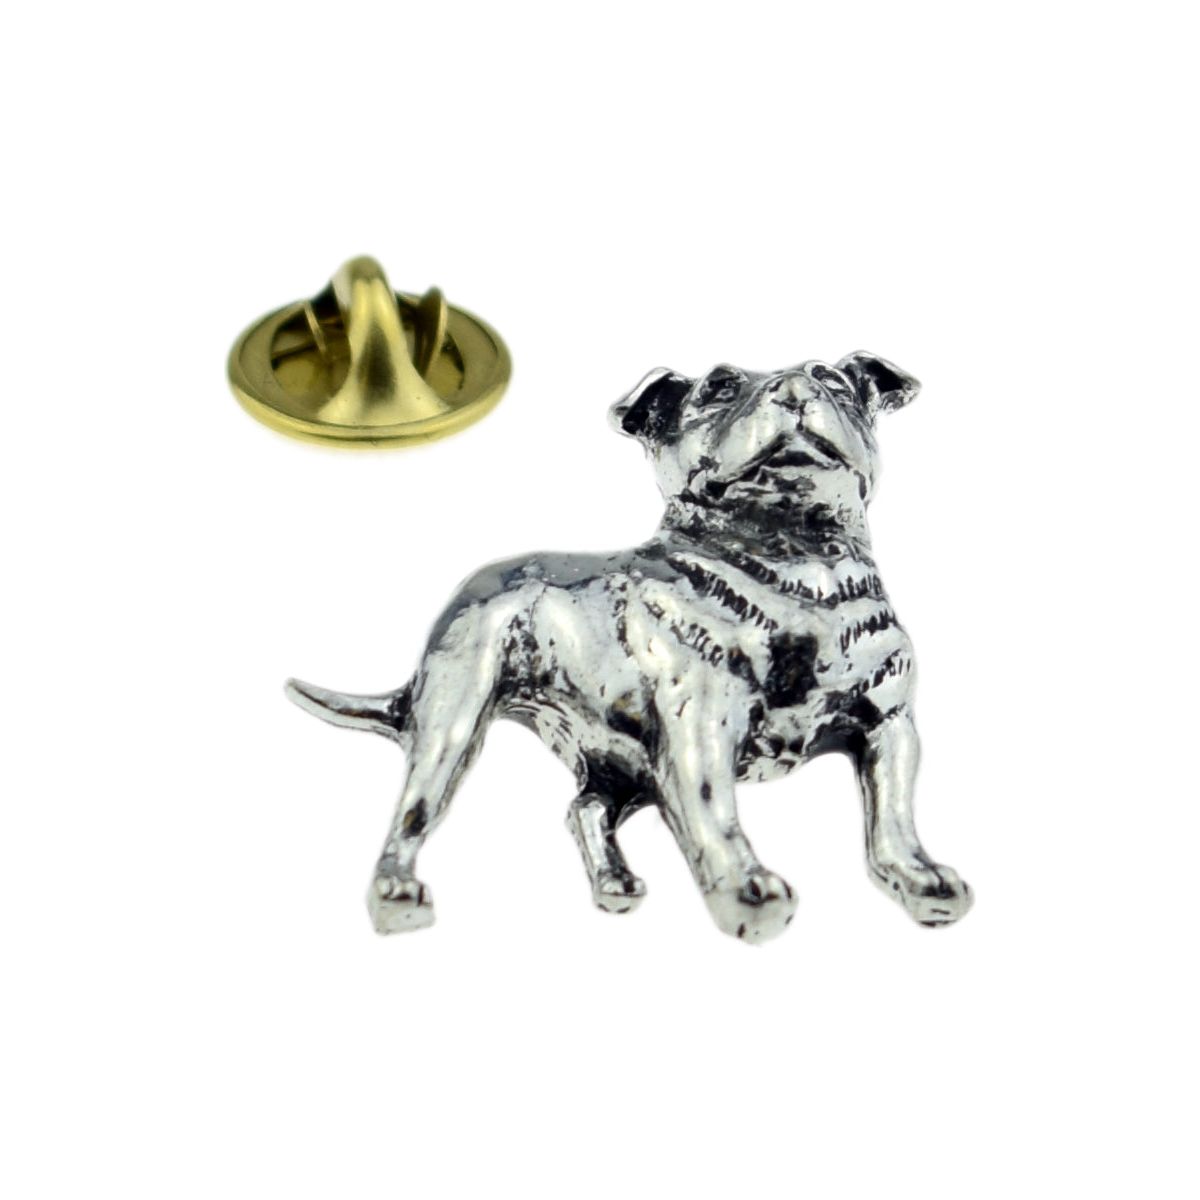 Staffordshire Bull Terrier Dog Pewter Lapel Pin Badge - Ashton and Finch